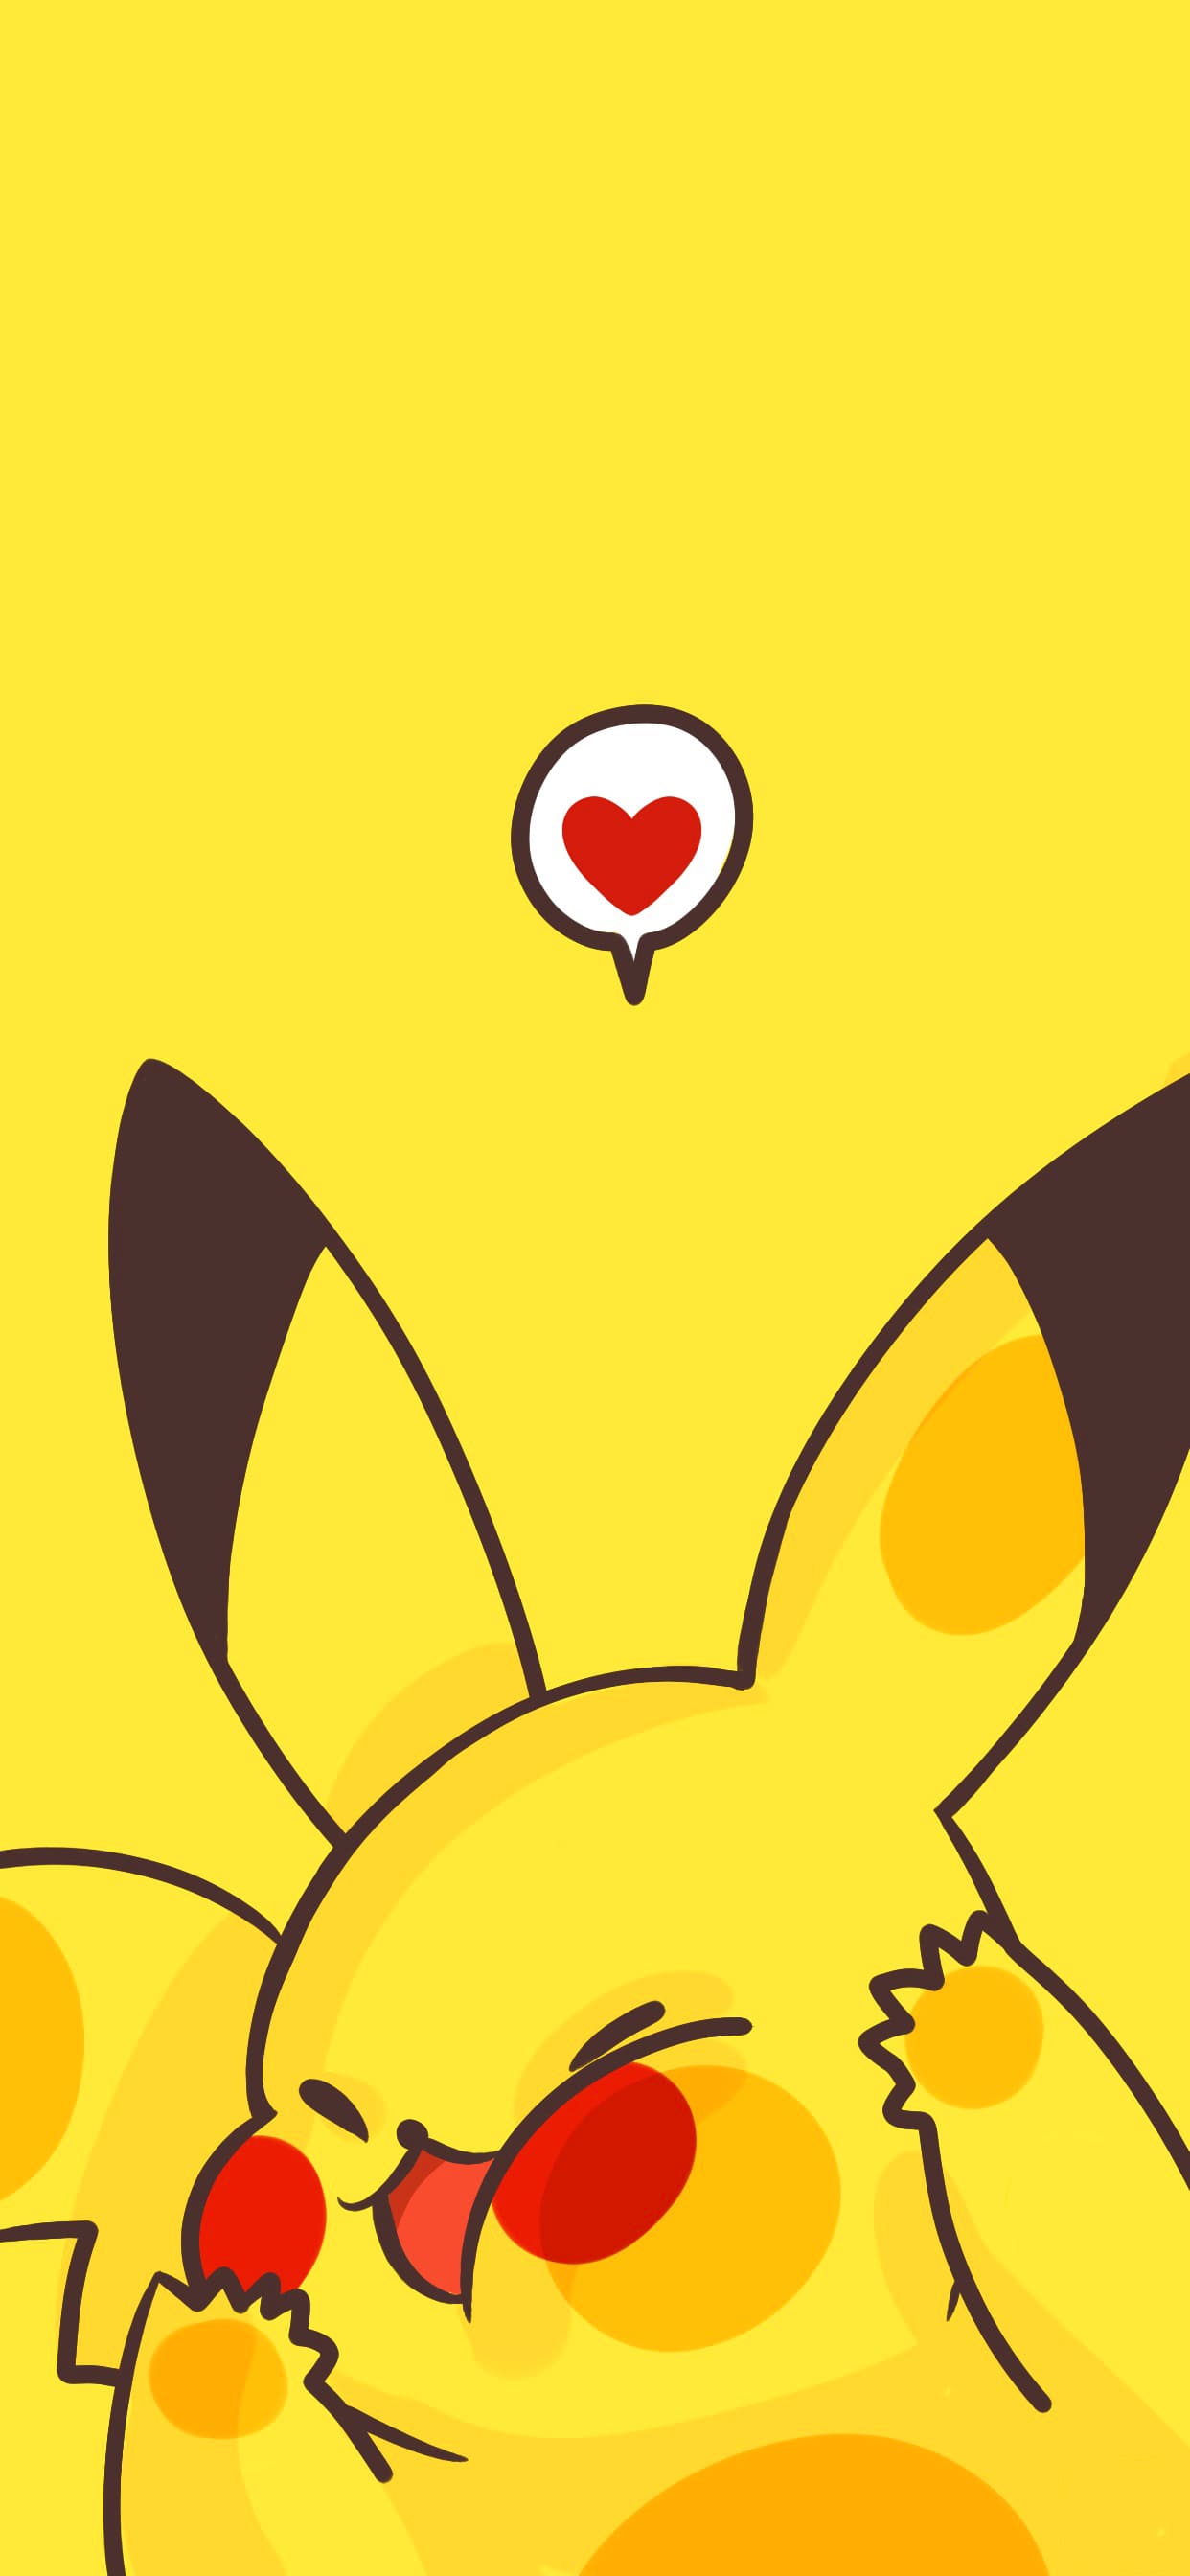 A cute pikachu is laying on the ground - Pikachu